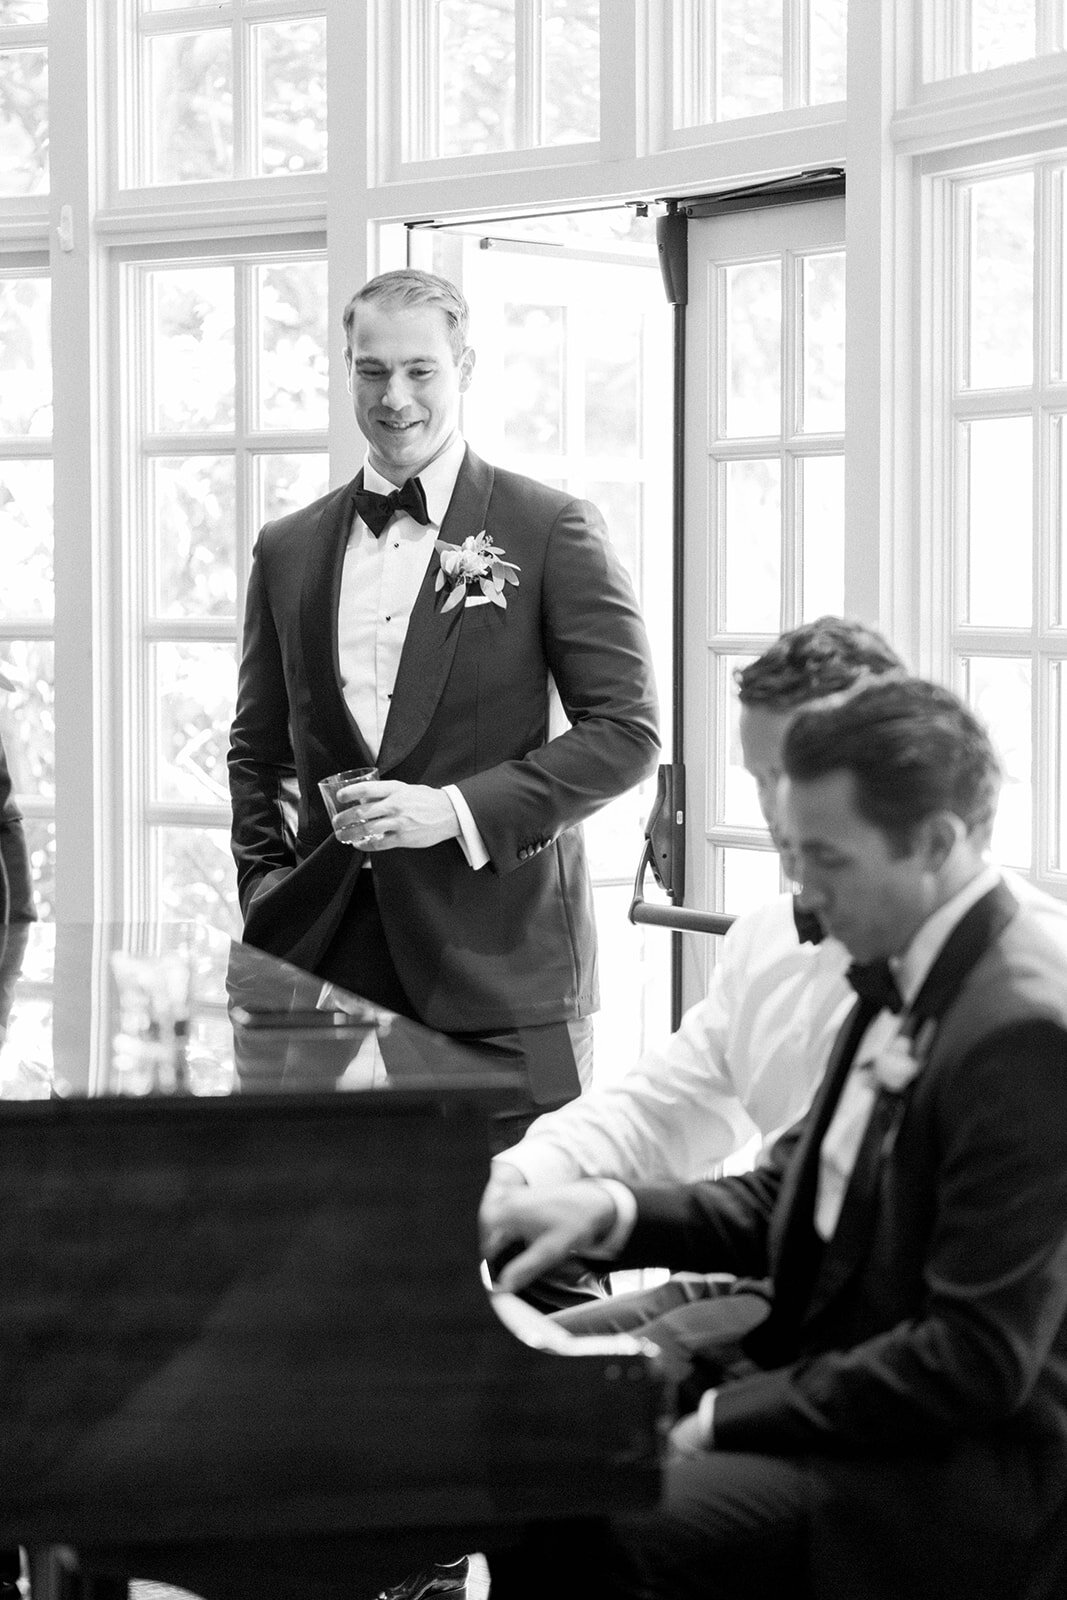 Longue Vue Club Wedding captured by Abbie Tyler Photography